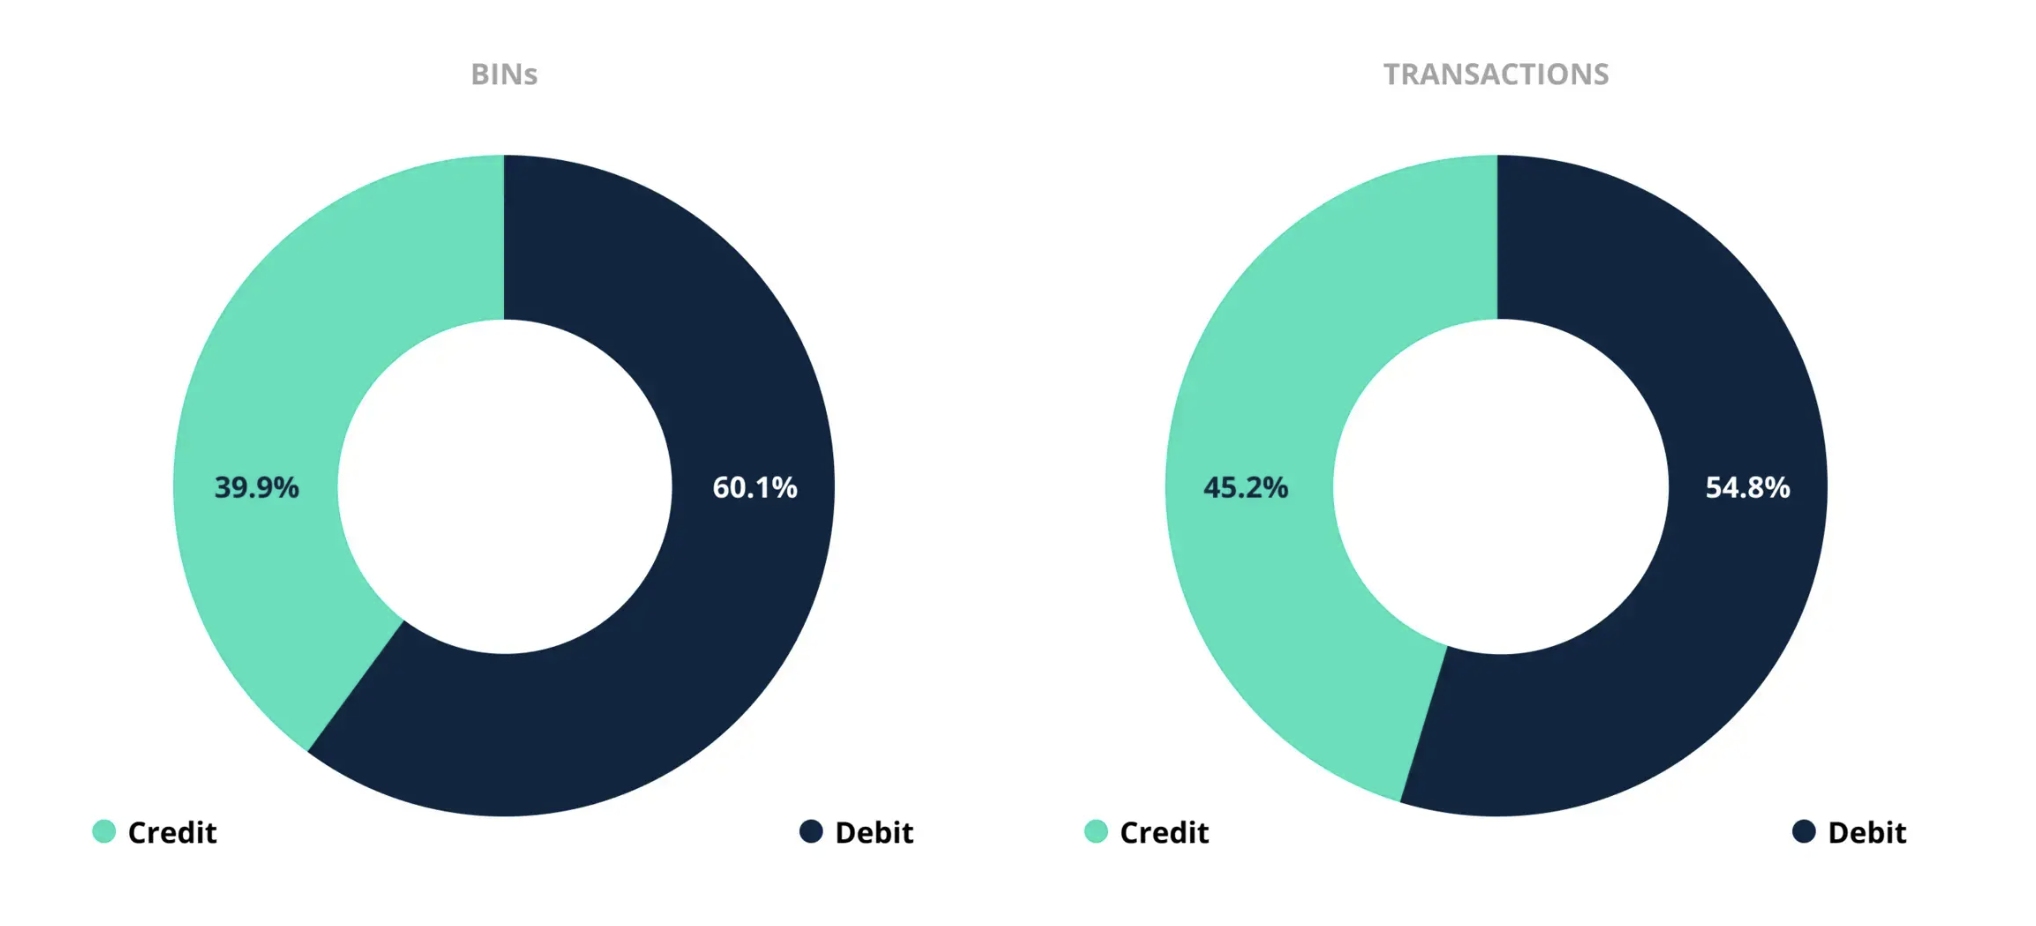 BINs and transaction volume broken down by credit cards and debit cards